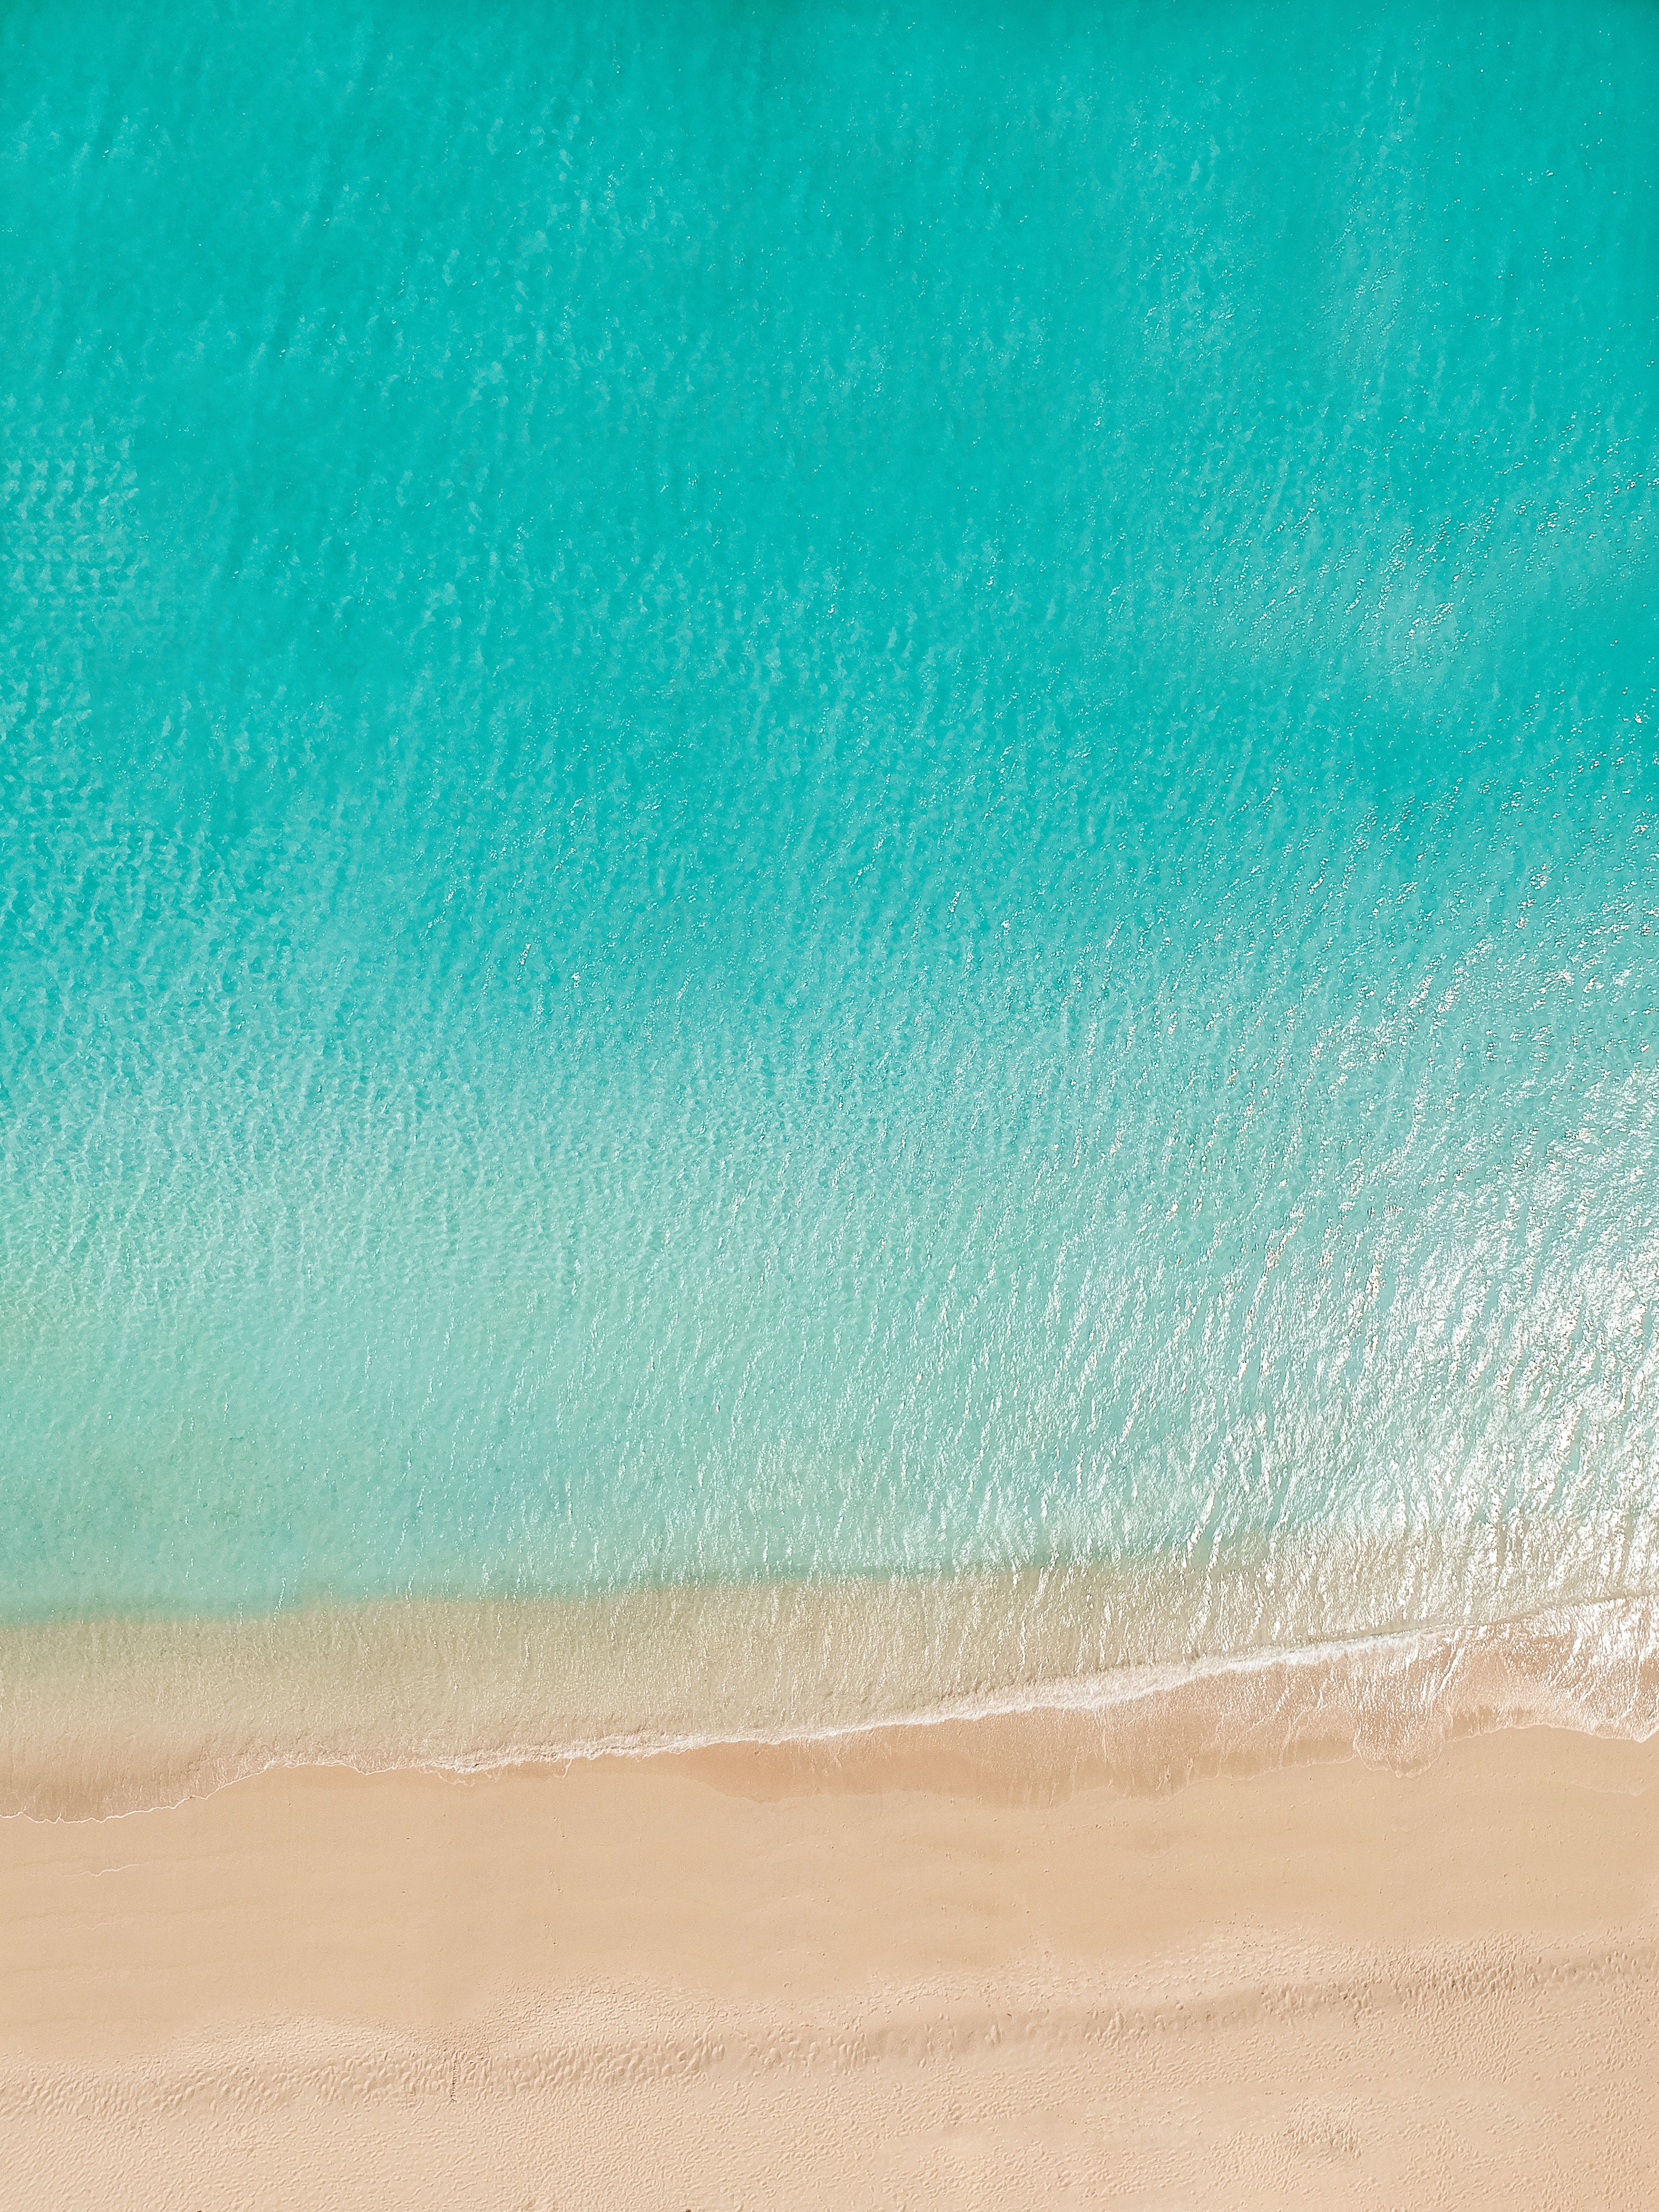 nature, ocean, coast, view from above, sand